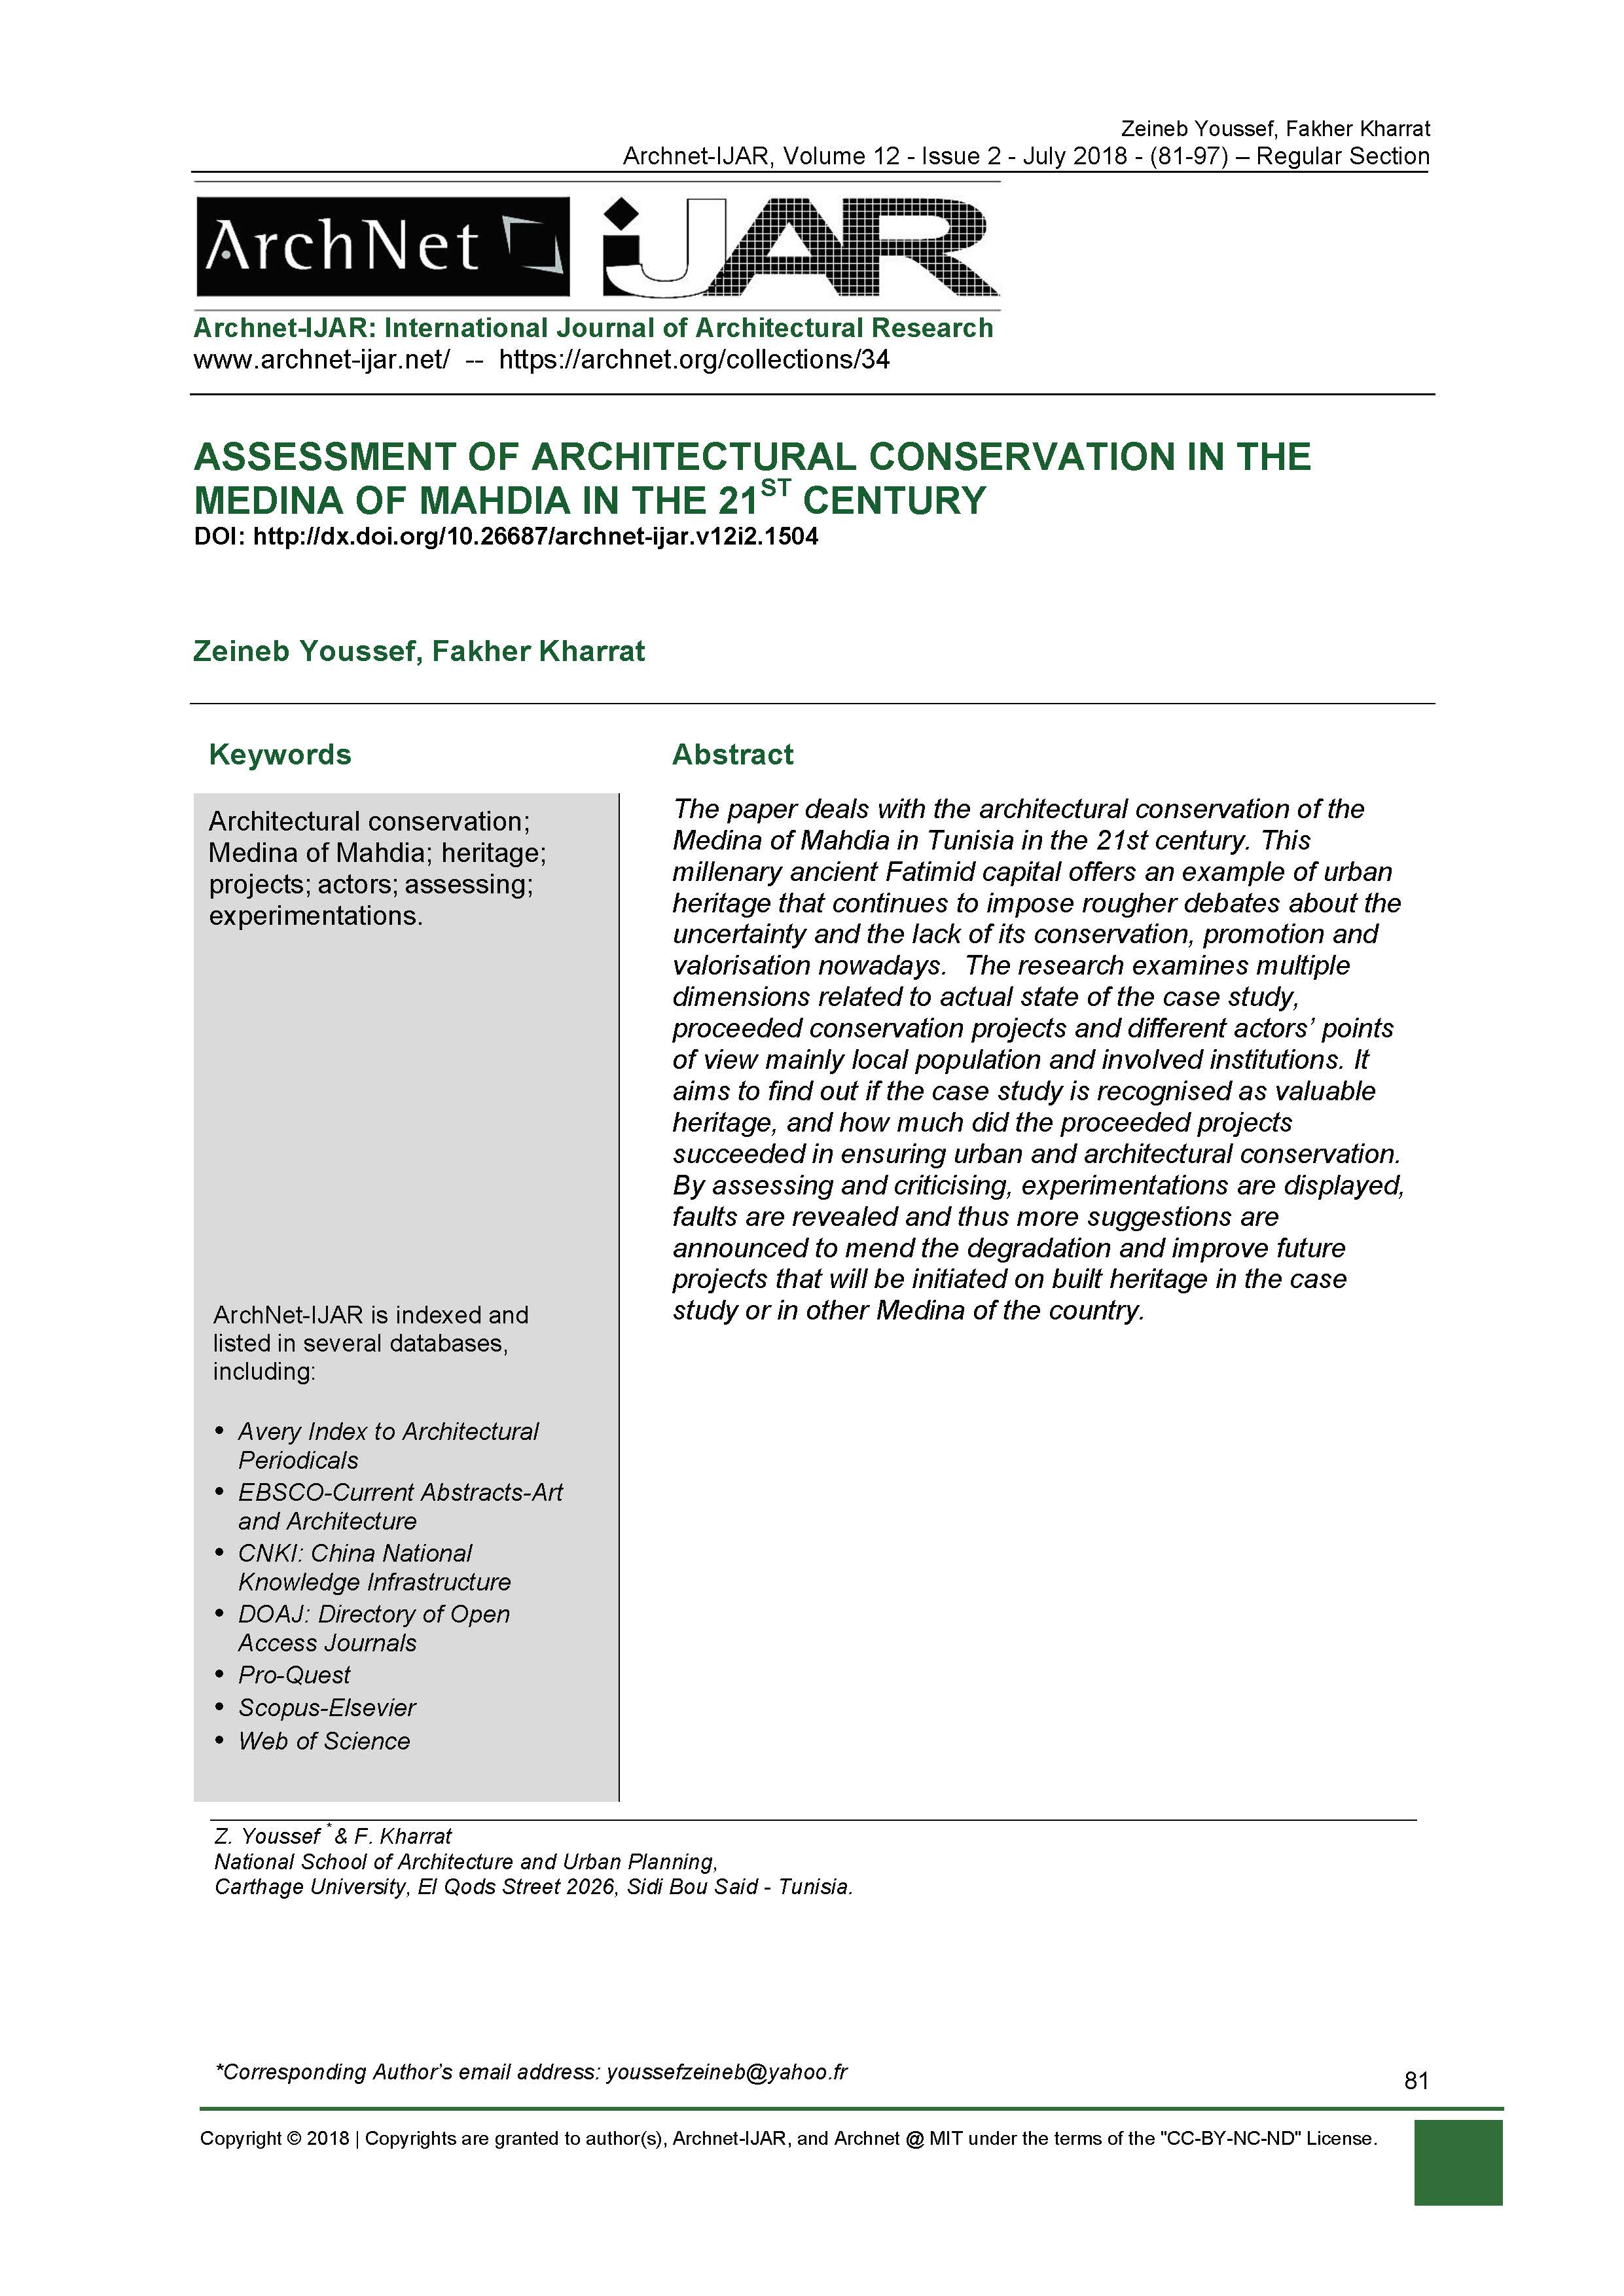 Assessment of Architectural Conservation in the Medina of Mahdia in the 21st Century